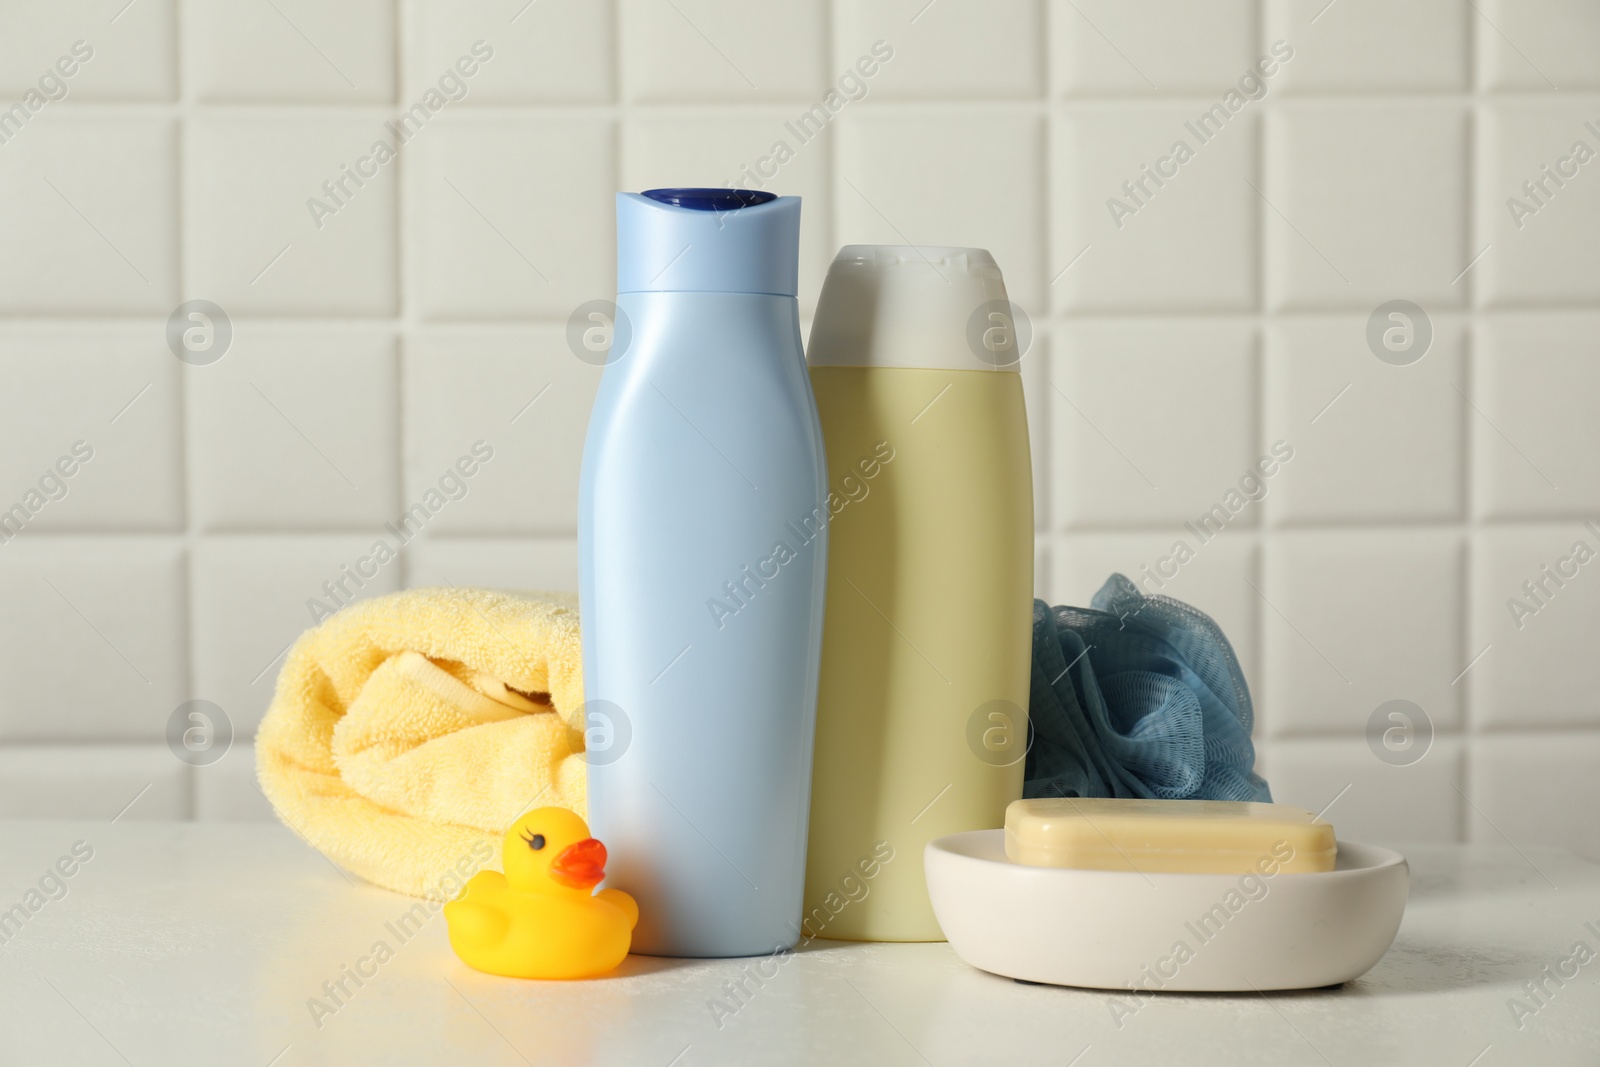 Photo of Baby cosmetic products, bath duck, sponge and towel on white table against tiled wall